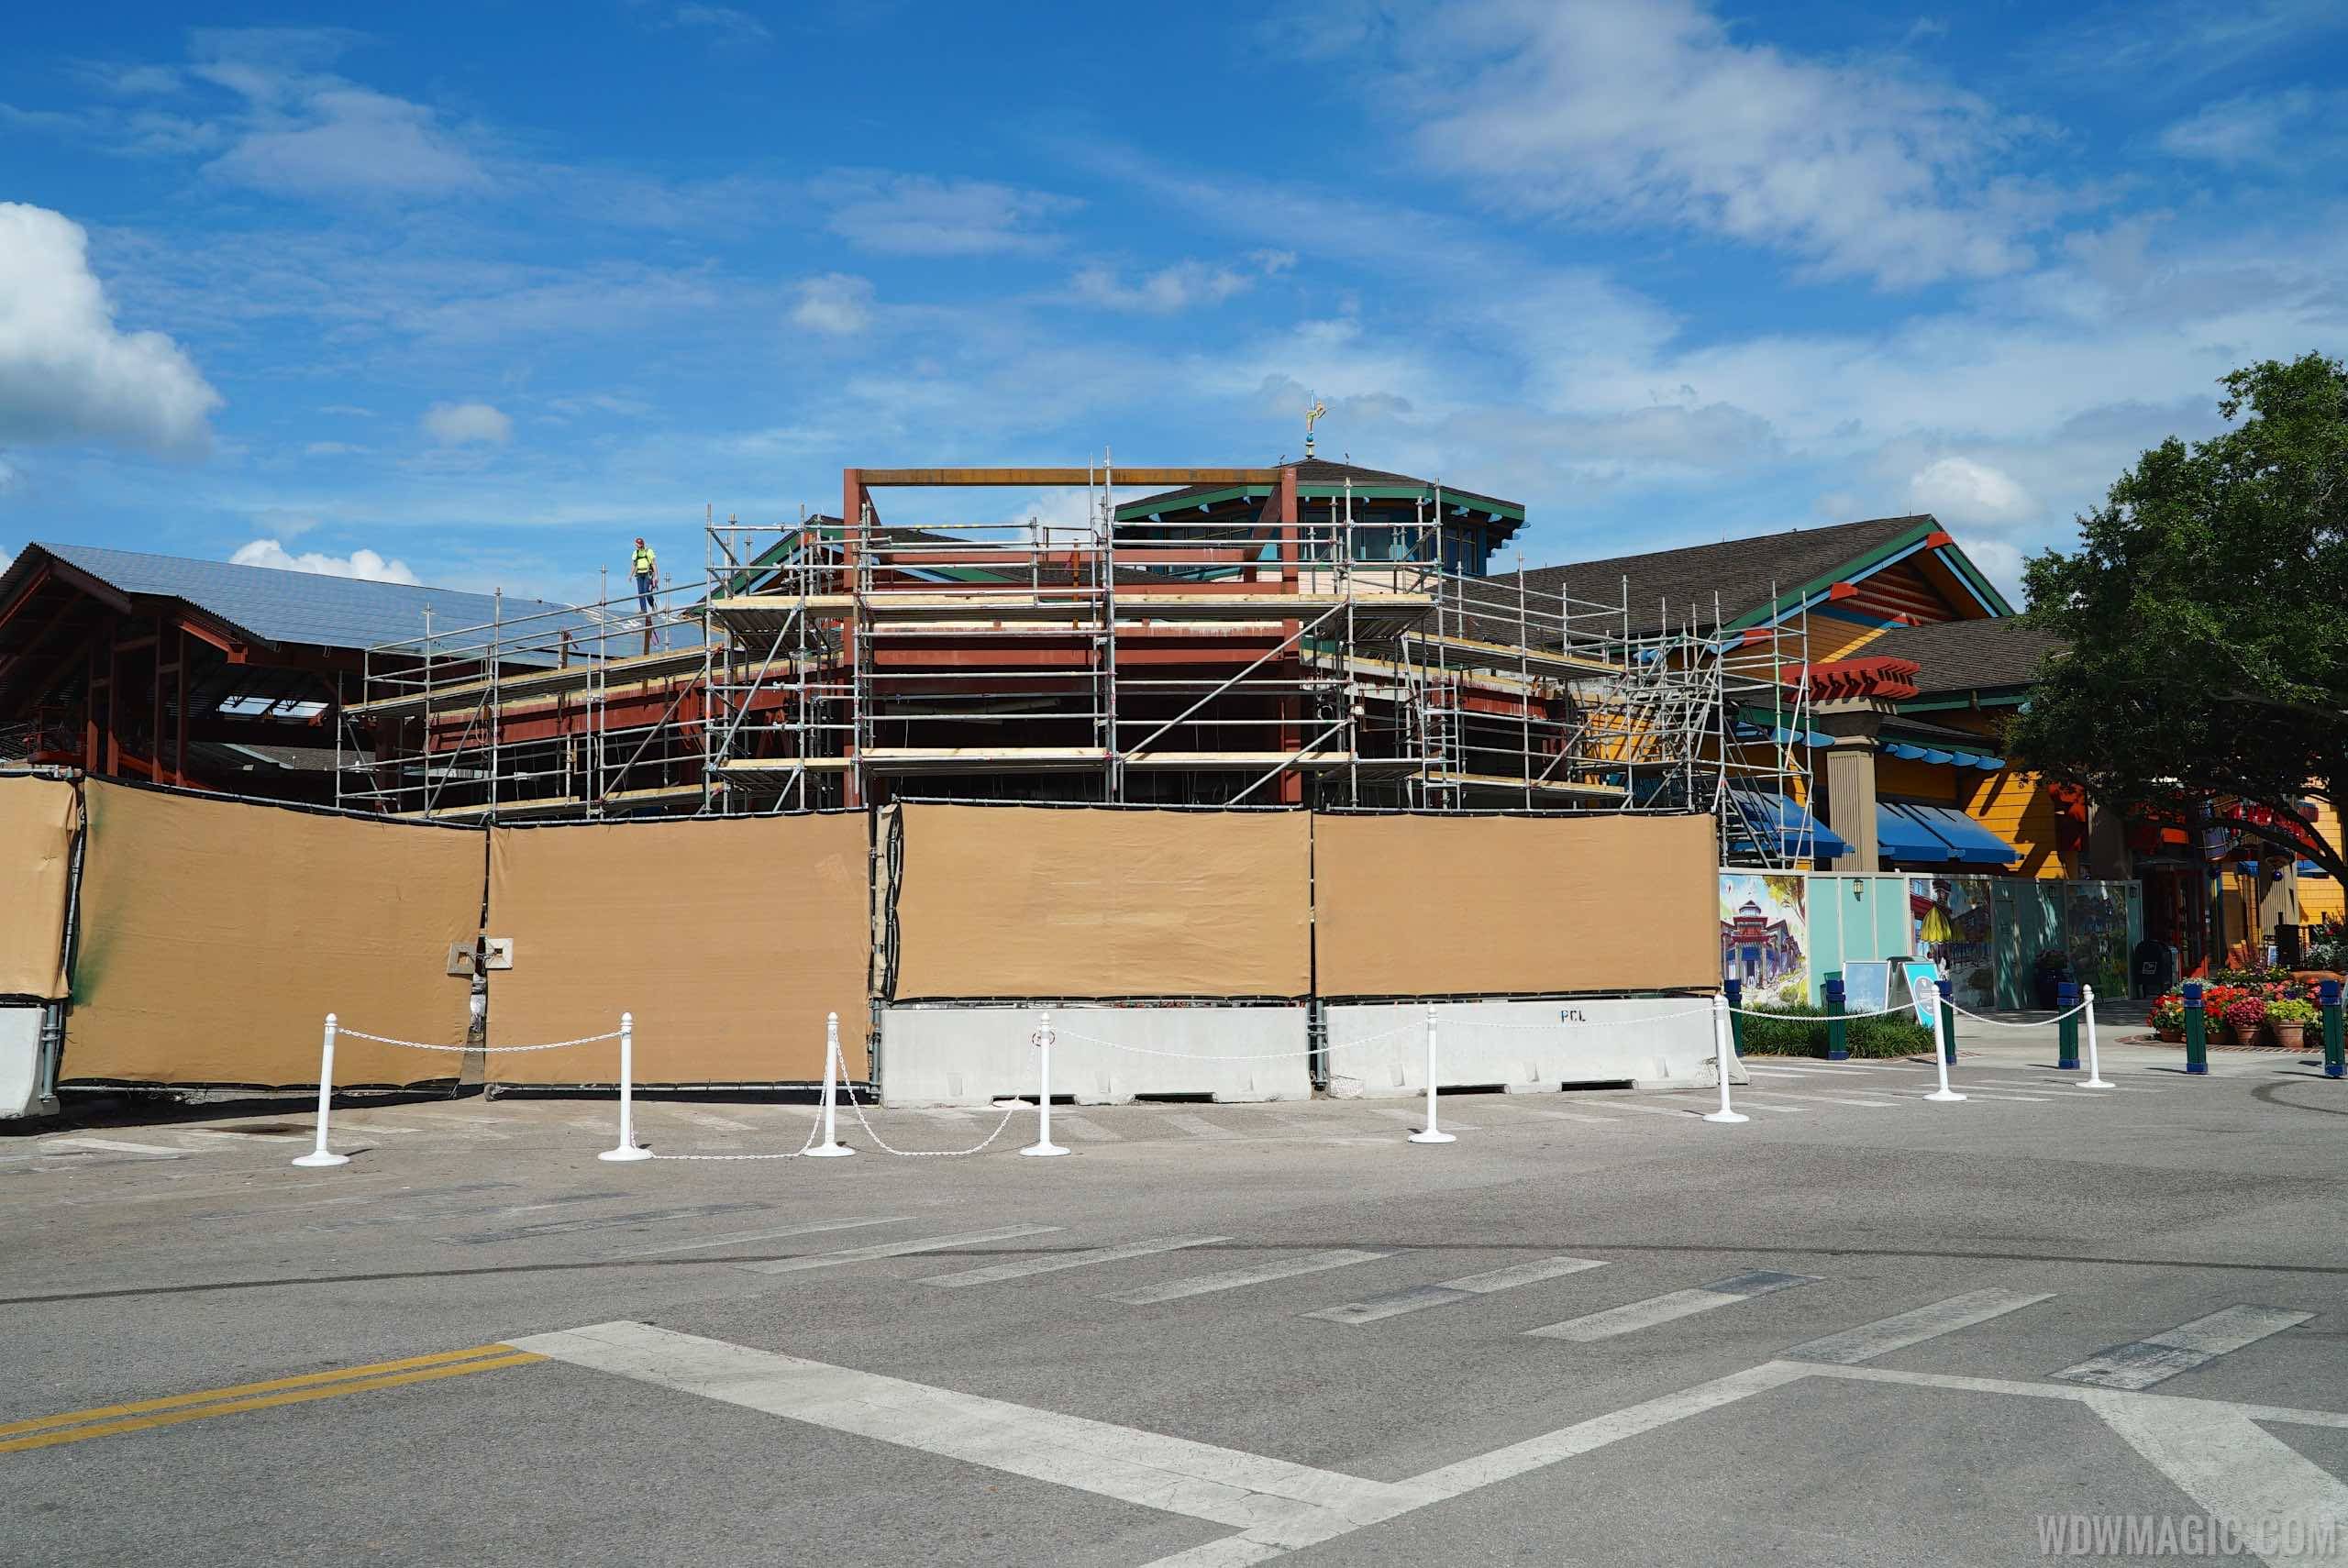 PHOTOS - Latest look at the World of Disney store expansion